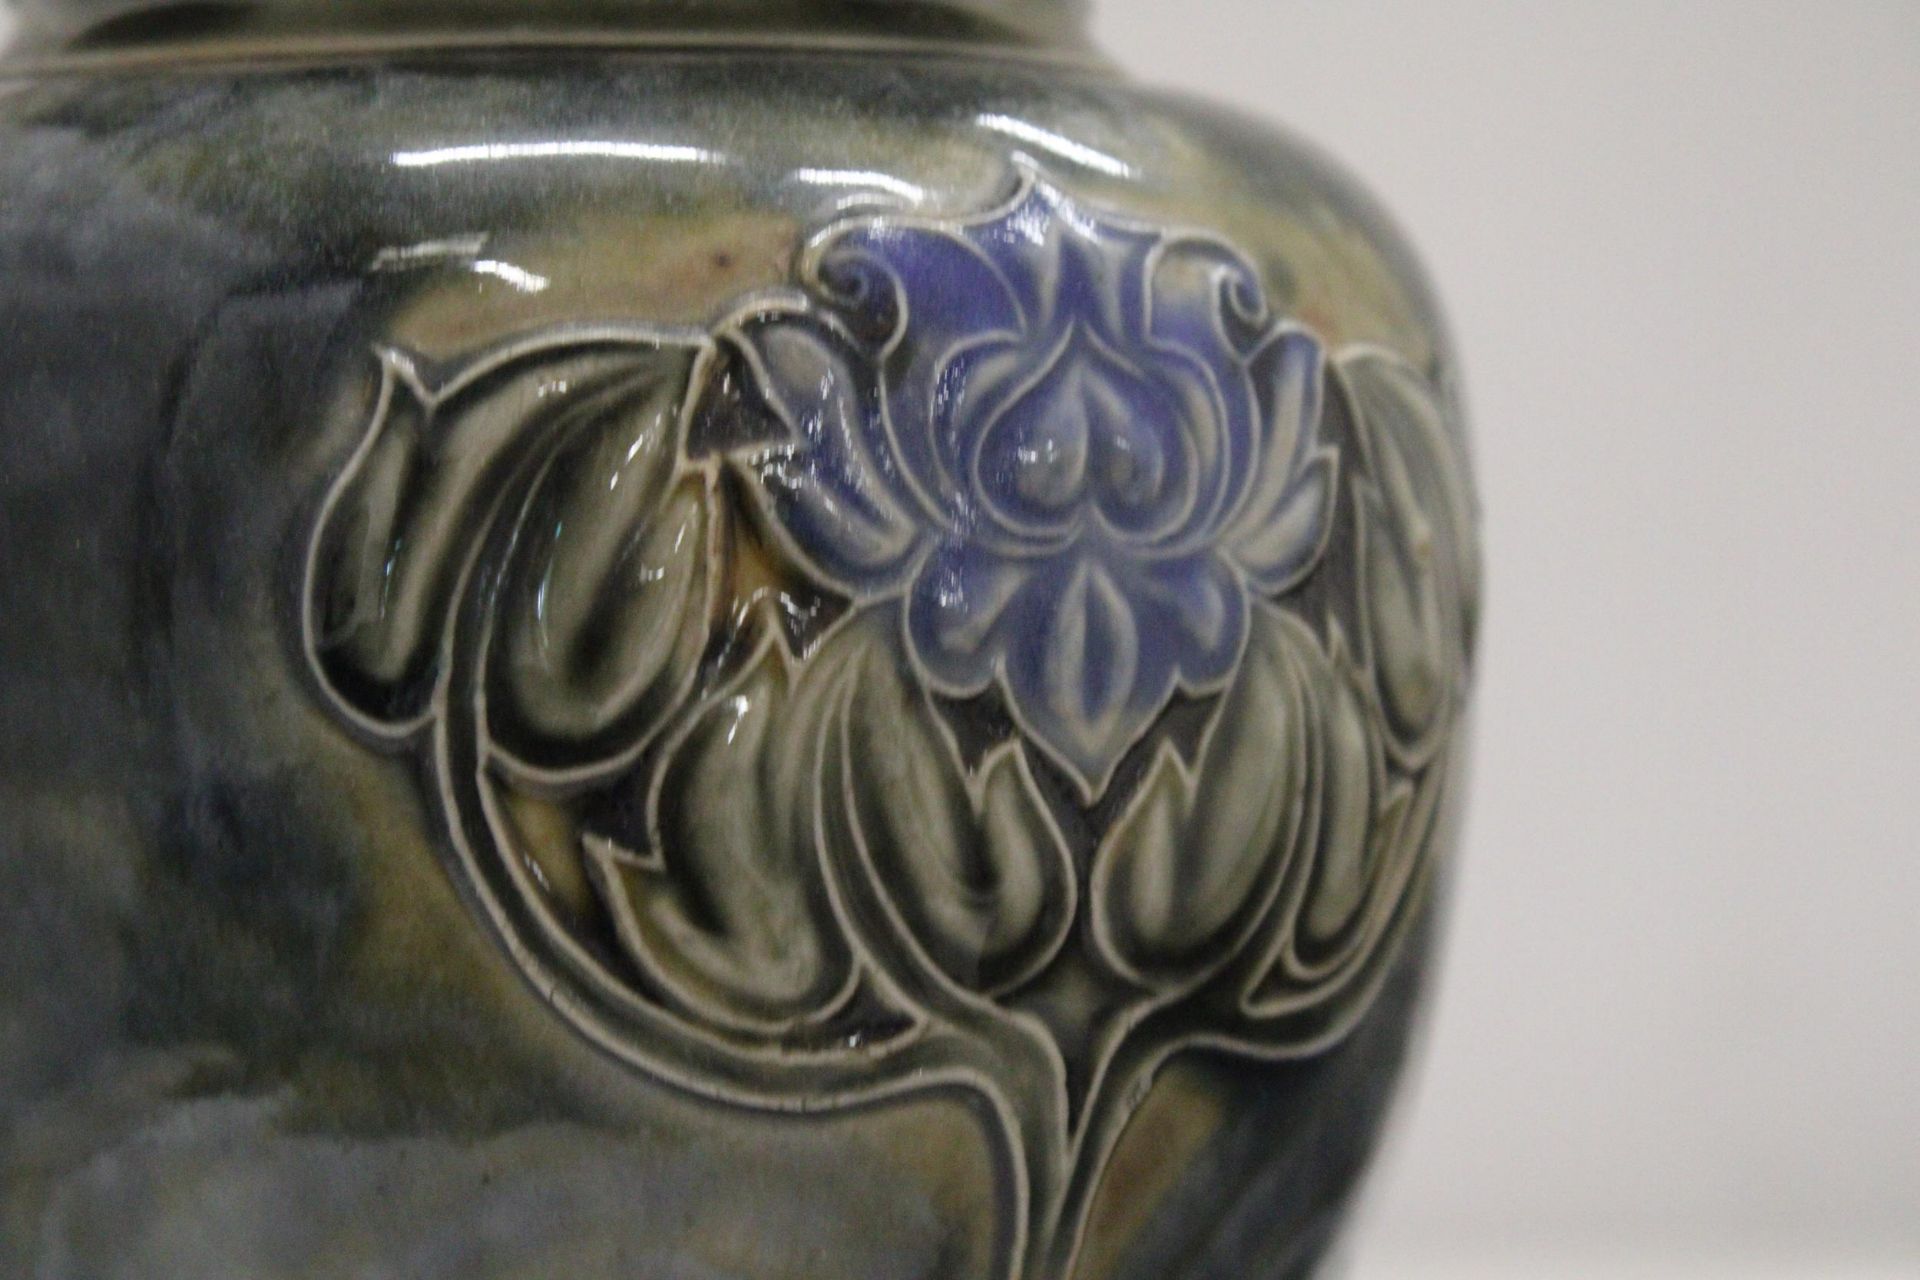 A PAIR OF ROYAL DOULTON LILY PARTINGTON ART NOUVEAU STYLE VASES WITH RELIEF FLOWERS - Image 7 of 7